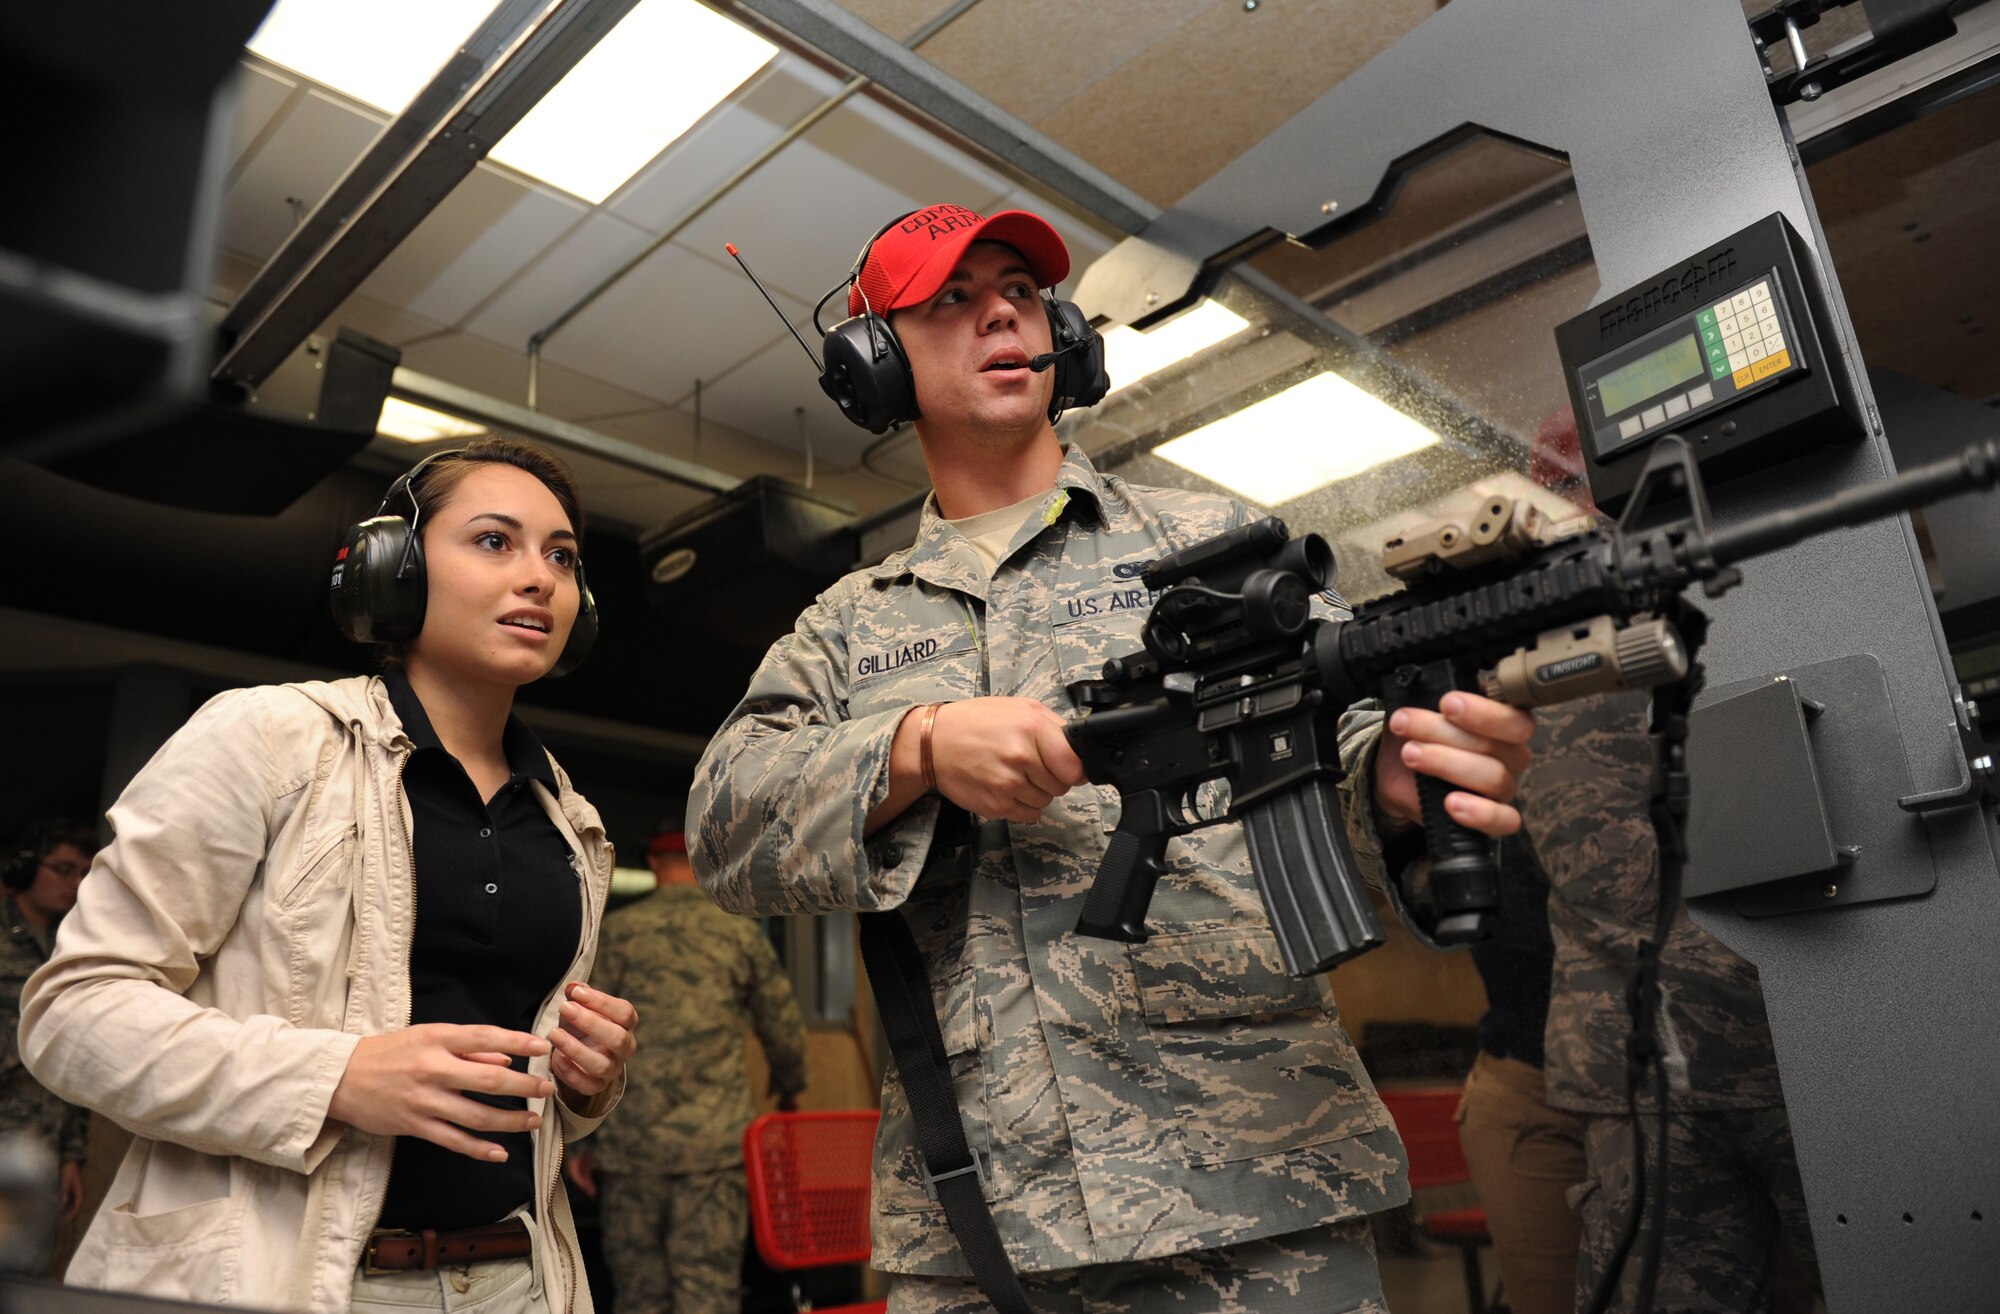 Gabriela Valle-Ramos, University of Alabama Air Force ROTC Cadet, receives M-4 weapon operating instructions from Senior Airman Caleb Gilliard, 81st Security Forces Squadron combat arms instructor, at the 81st SFS CATM range during Pathways to Blue April 15, 2016, Keesler Air Force Base, Miss. Pathways to Blue, a diversity outreach event hosted by 2nd Air Force, the 81st Training Wing and the 403rd Wing, included more than 180 cadets from Air Force ROTC detachments from various colleges and universities. Cadets received hands-on briefings on technical and flying operations and an orientation flight in support of the Air Force's Diversity Strategic Roadmap program. (U.S. Air Force photo by Kemberly Groue)